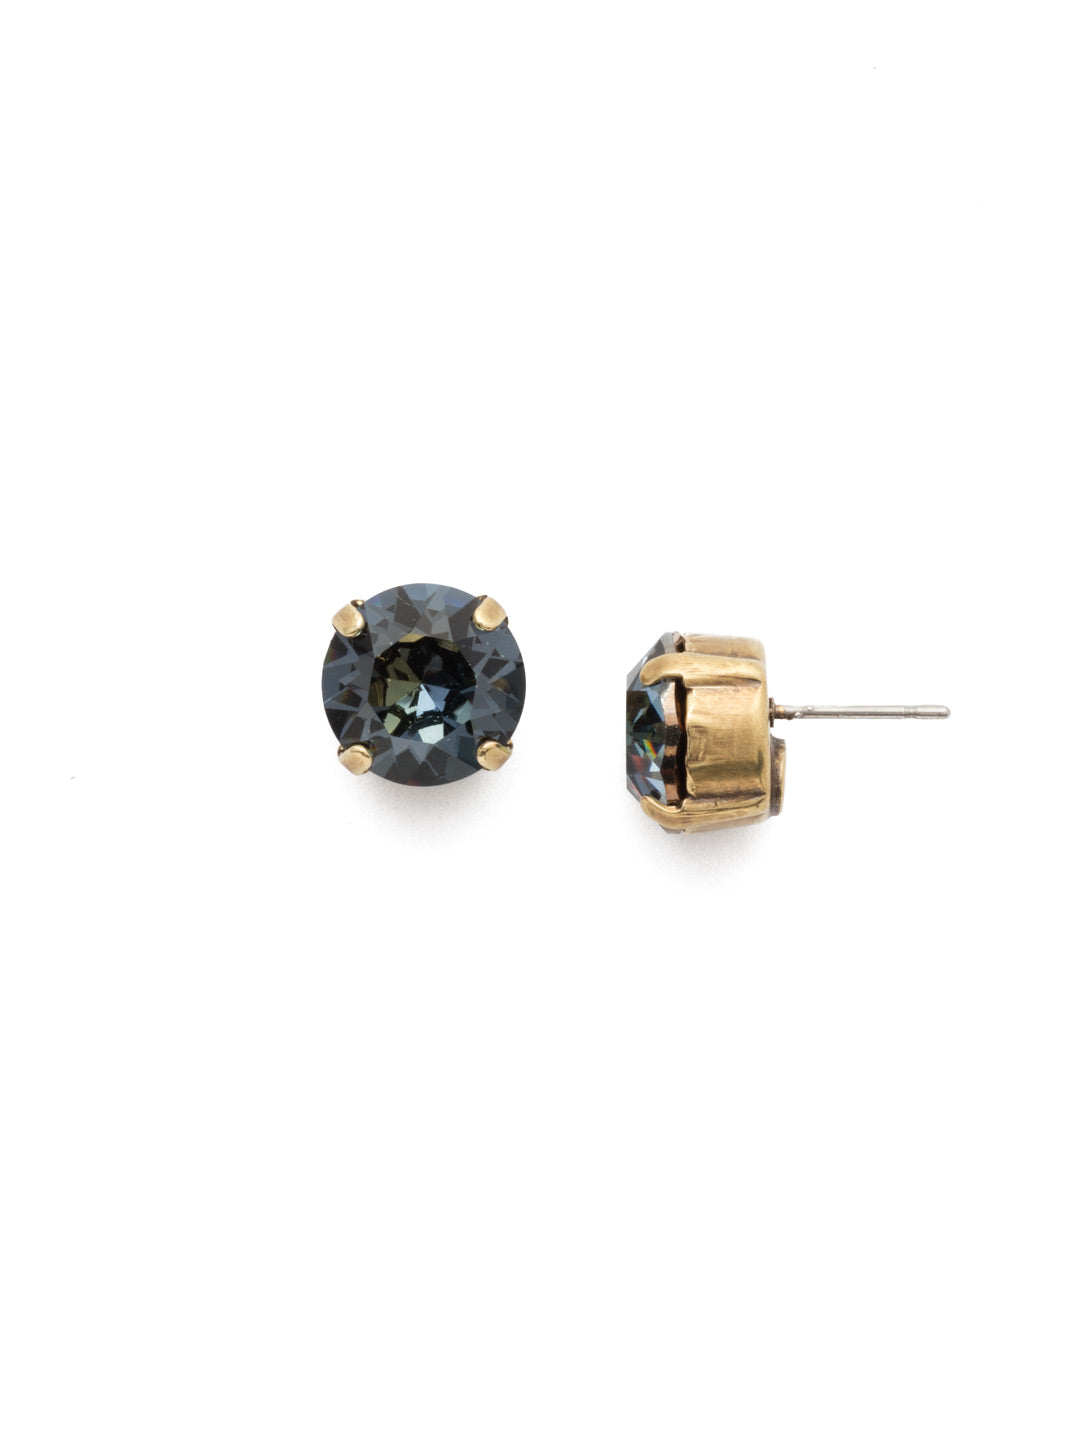 London Stud Earrings - ECM14AGSDE - <p>Everyone needs a great pair of studs. Add some classic sparkle to any occasion with these stud earrings. From Sorrelli's Selvedge Denim collection in our Antique Gold-tone finish.</p>